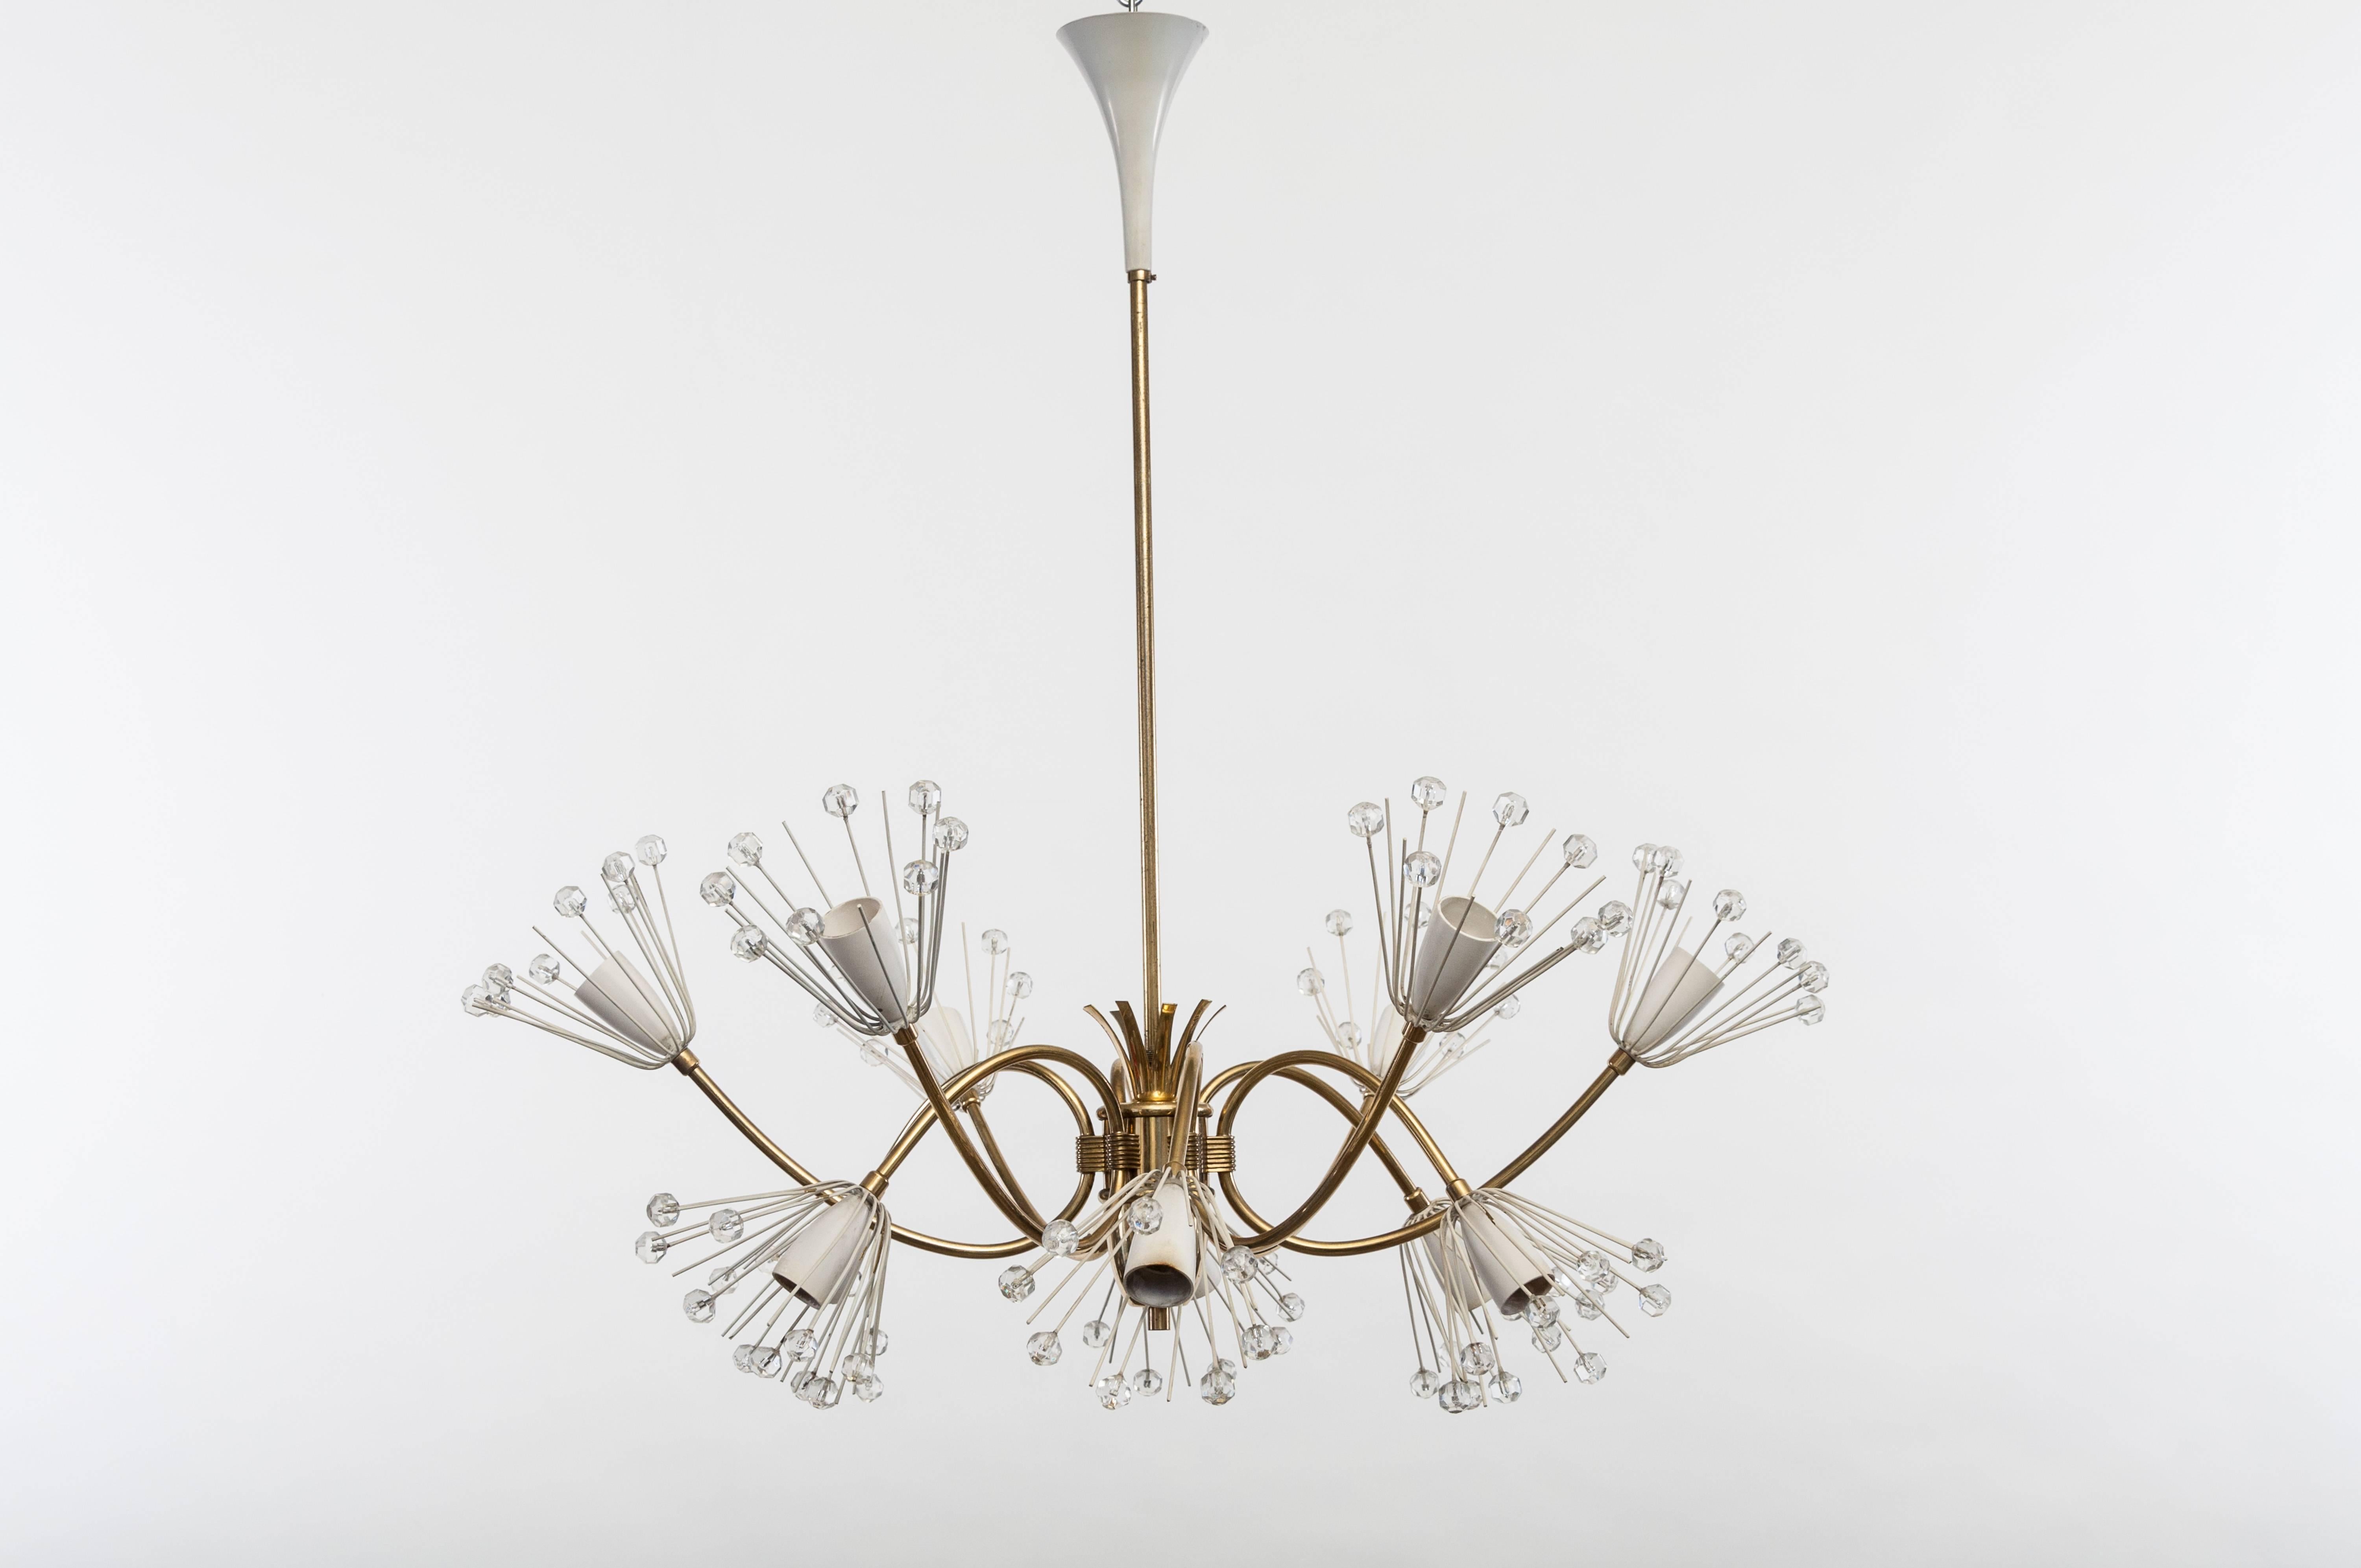 A very elegant and hard to find chandelier by Emil Stejnar, which was manufactured by Rupert Nikoll.
A midcentury six + six arms solid brass Design lamp by Emil Stejnar. White painted crystal cupholder with white E14 period sockets.
The brass arms